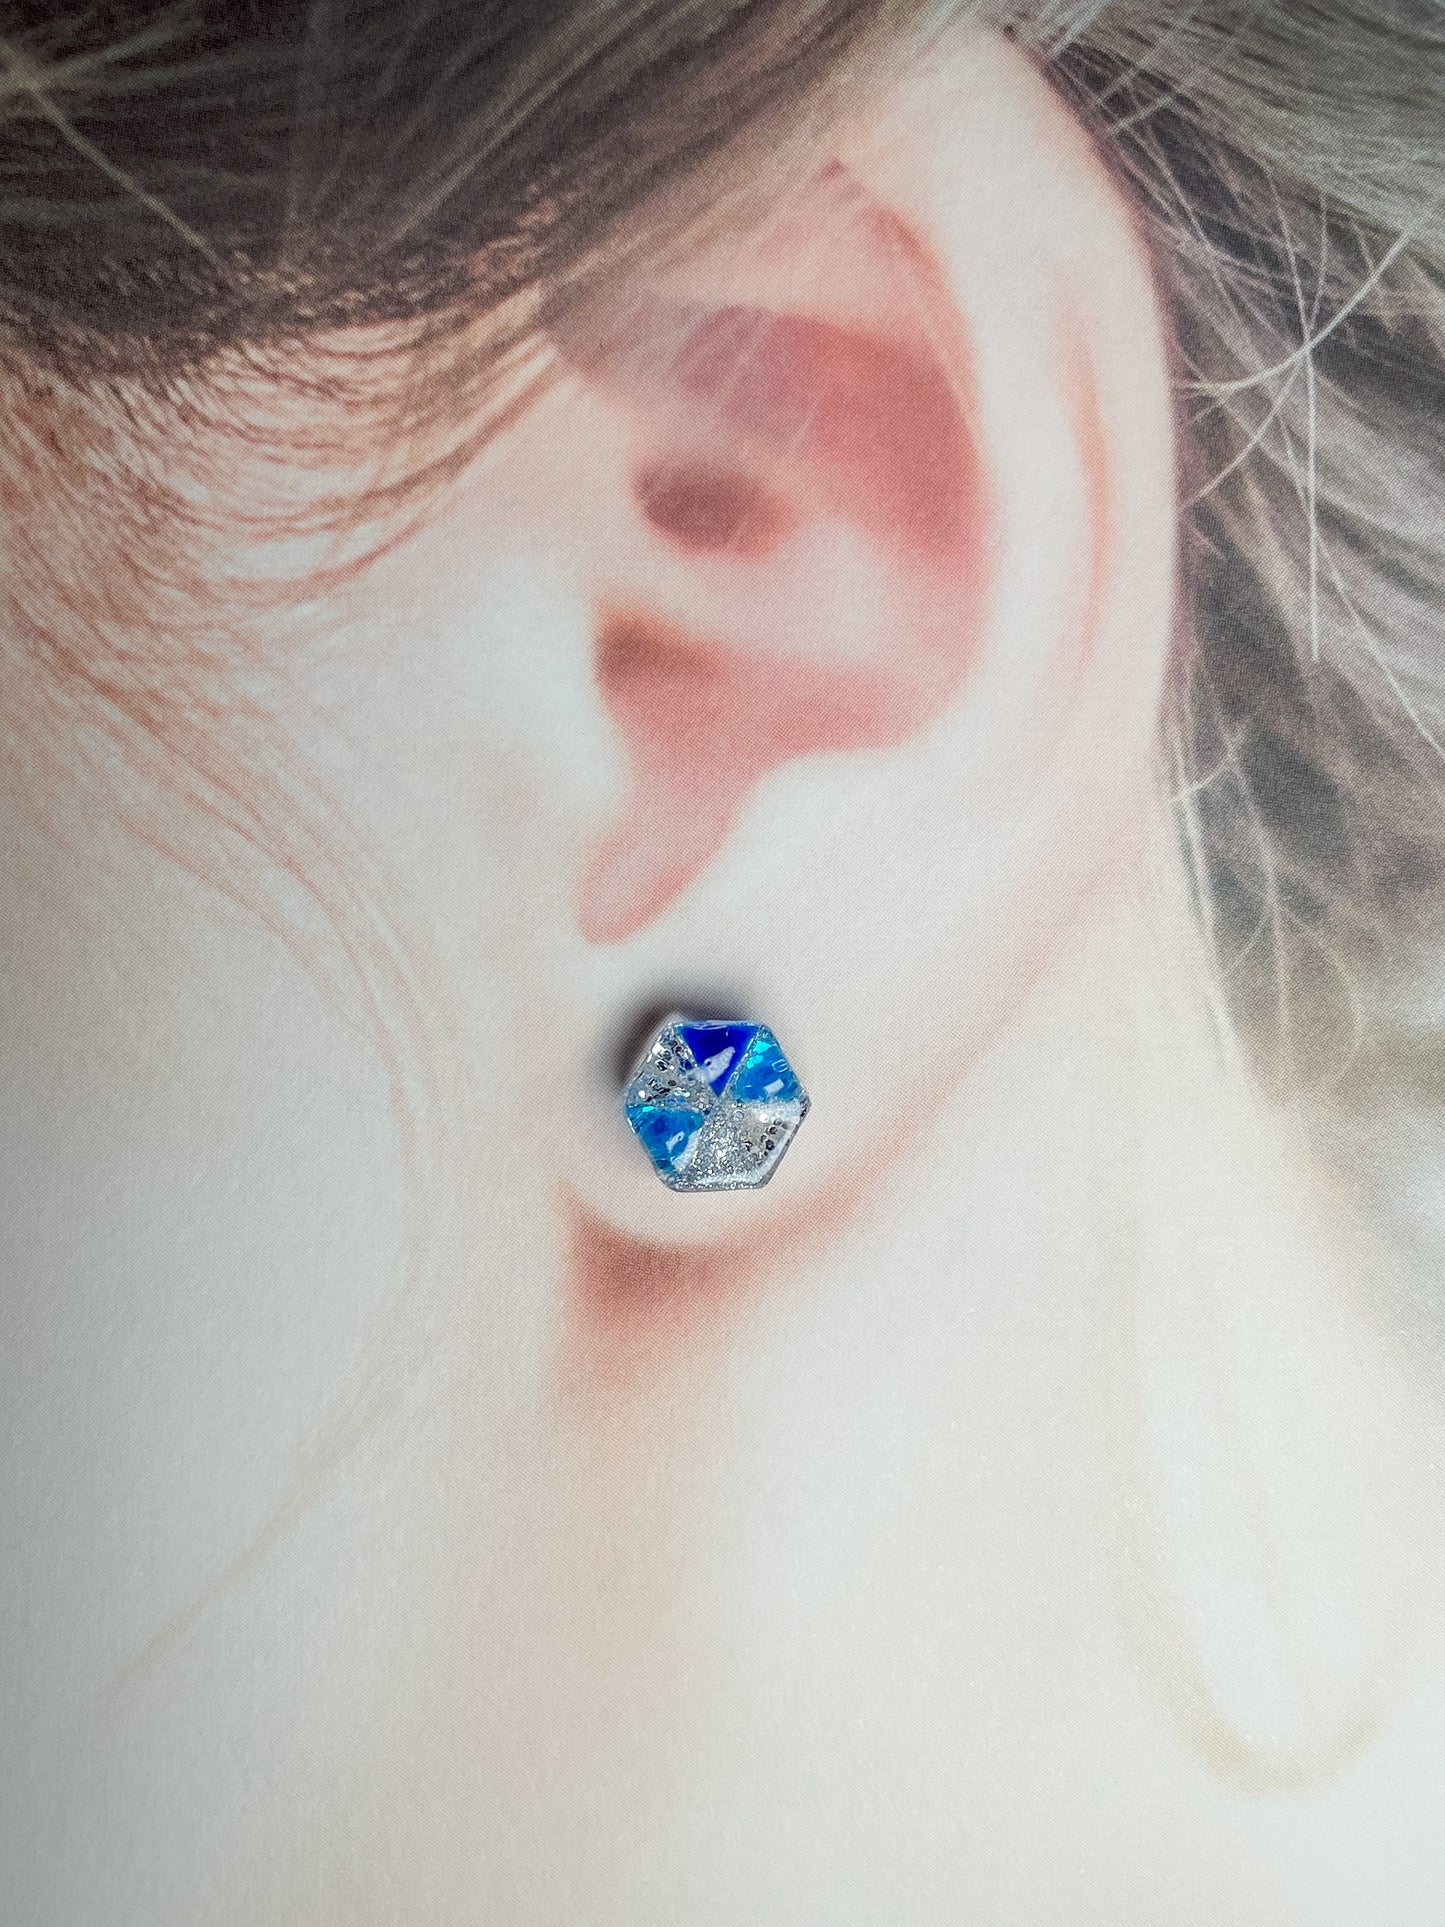 Sparkly winter studs earrings